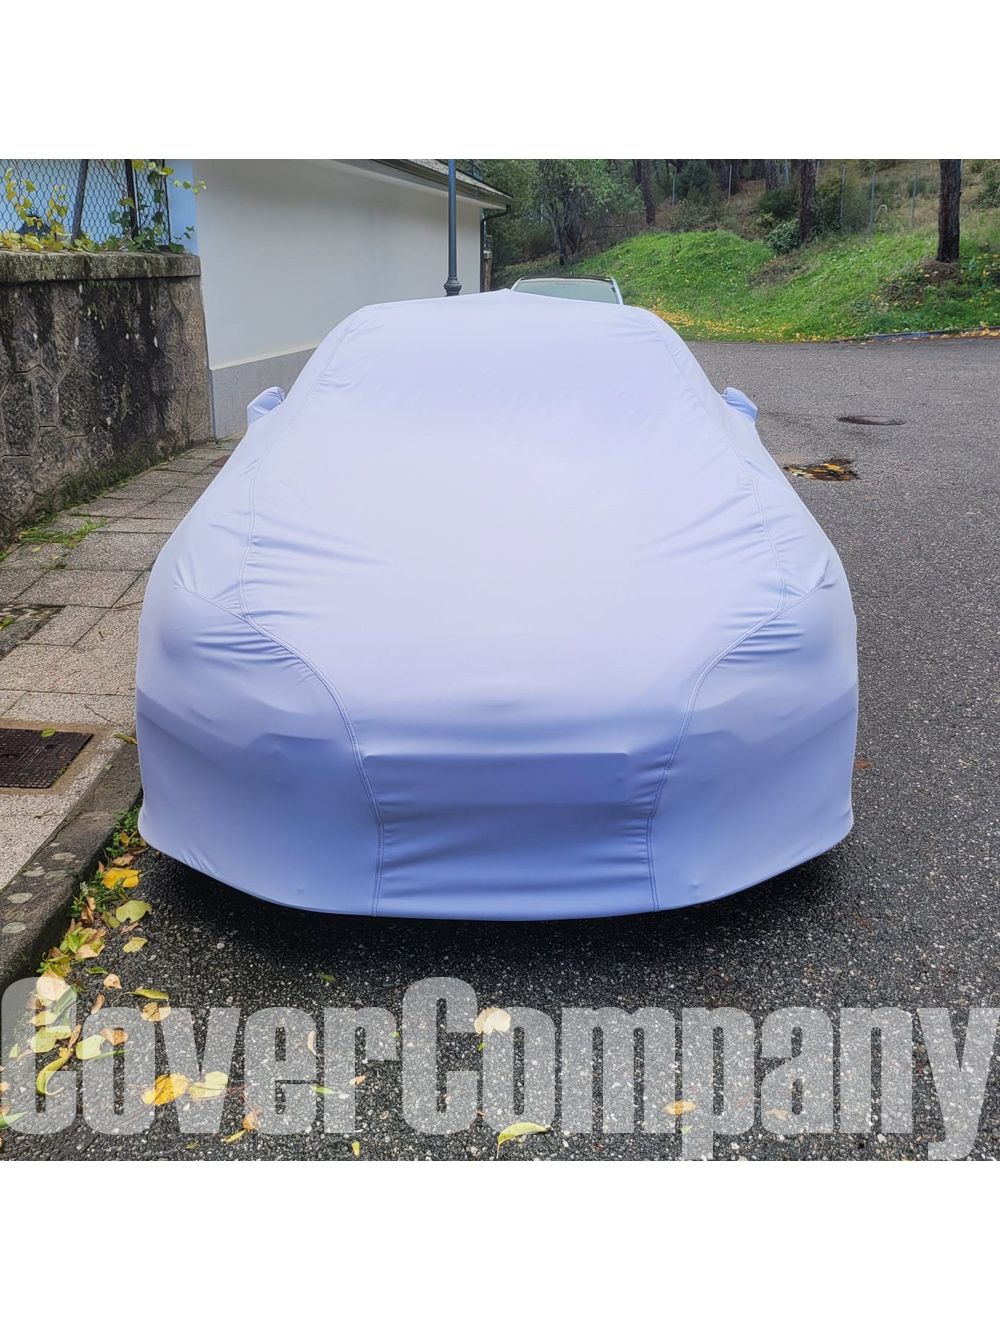 Toyota Custom Outdoor Car Cover. Waterproof car cover for Toyota